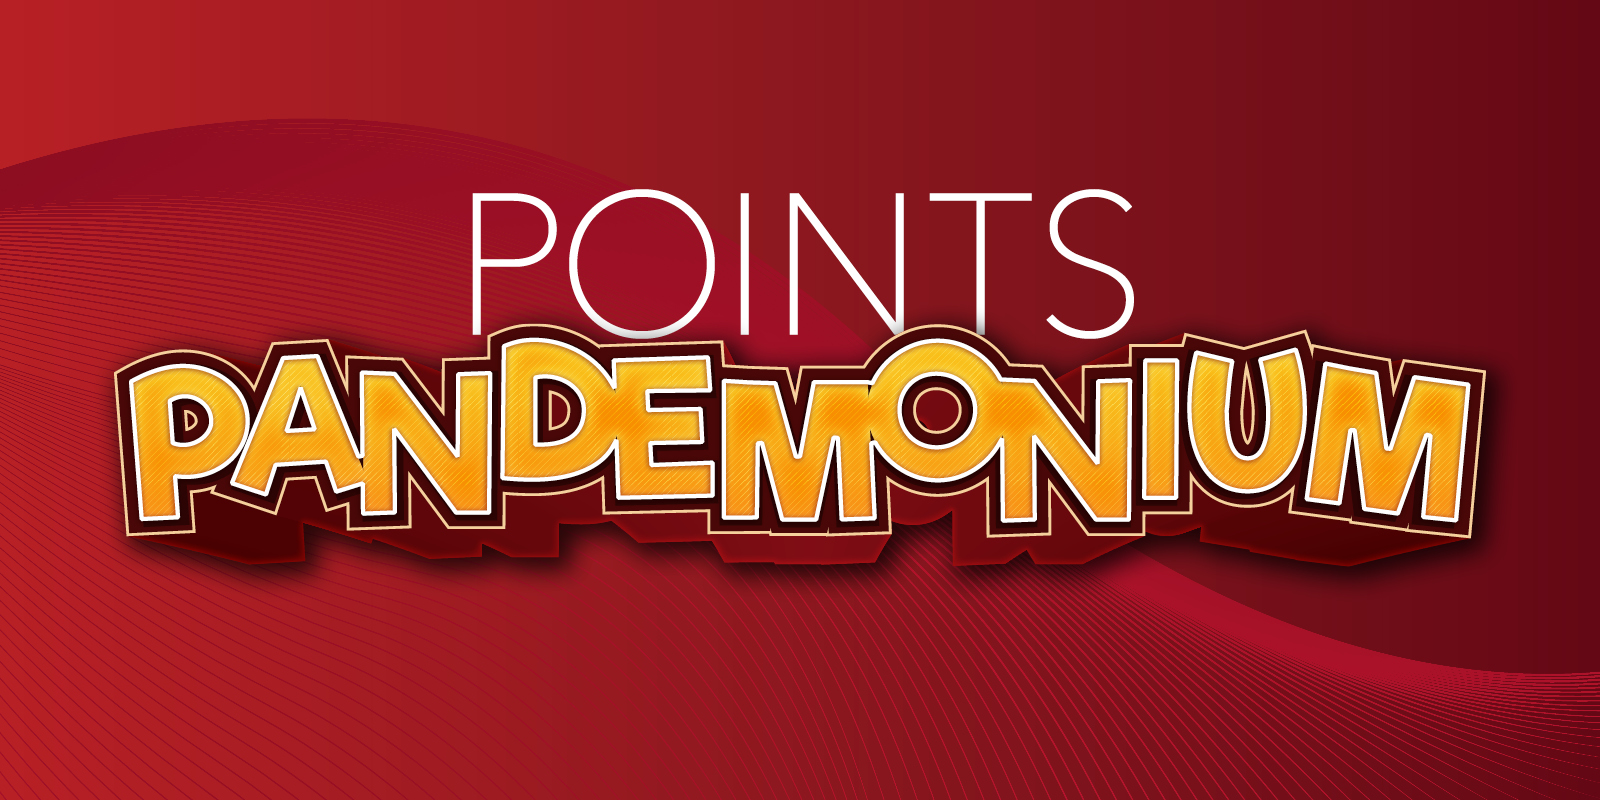 Points pandemonium sign against red background